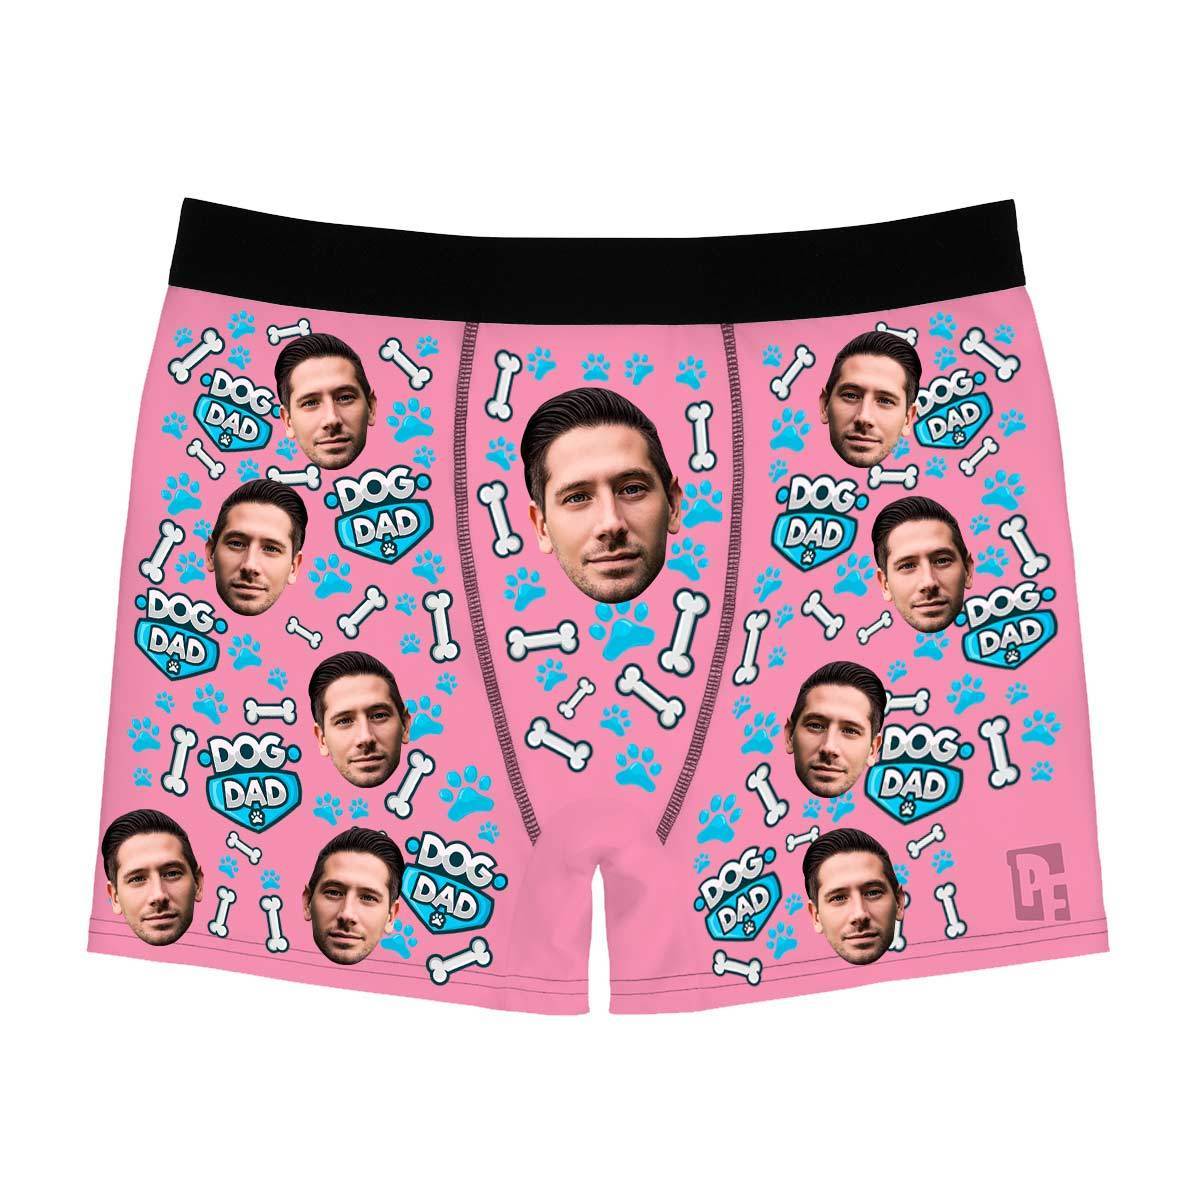 Pink Dog dad men's boxer briefs personalized with photo printed on them